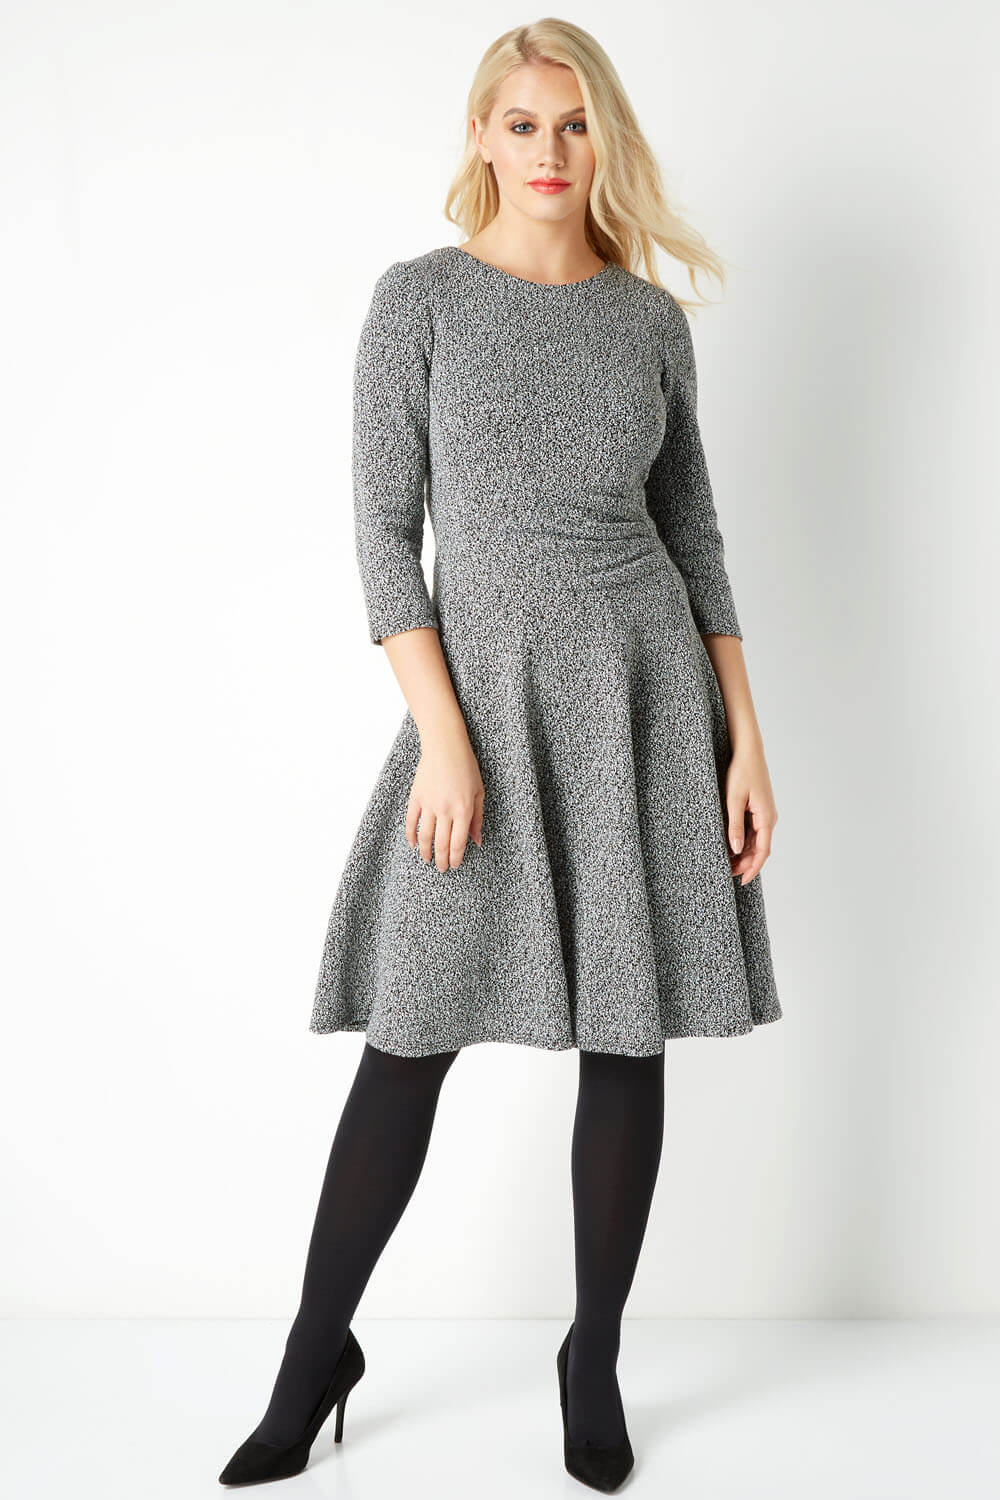 Fit and Flare 3/4 Sleeve Dress in Grey - Roman Originals UK